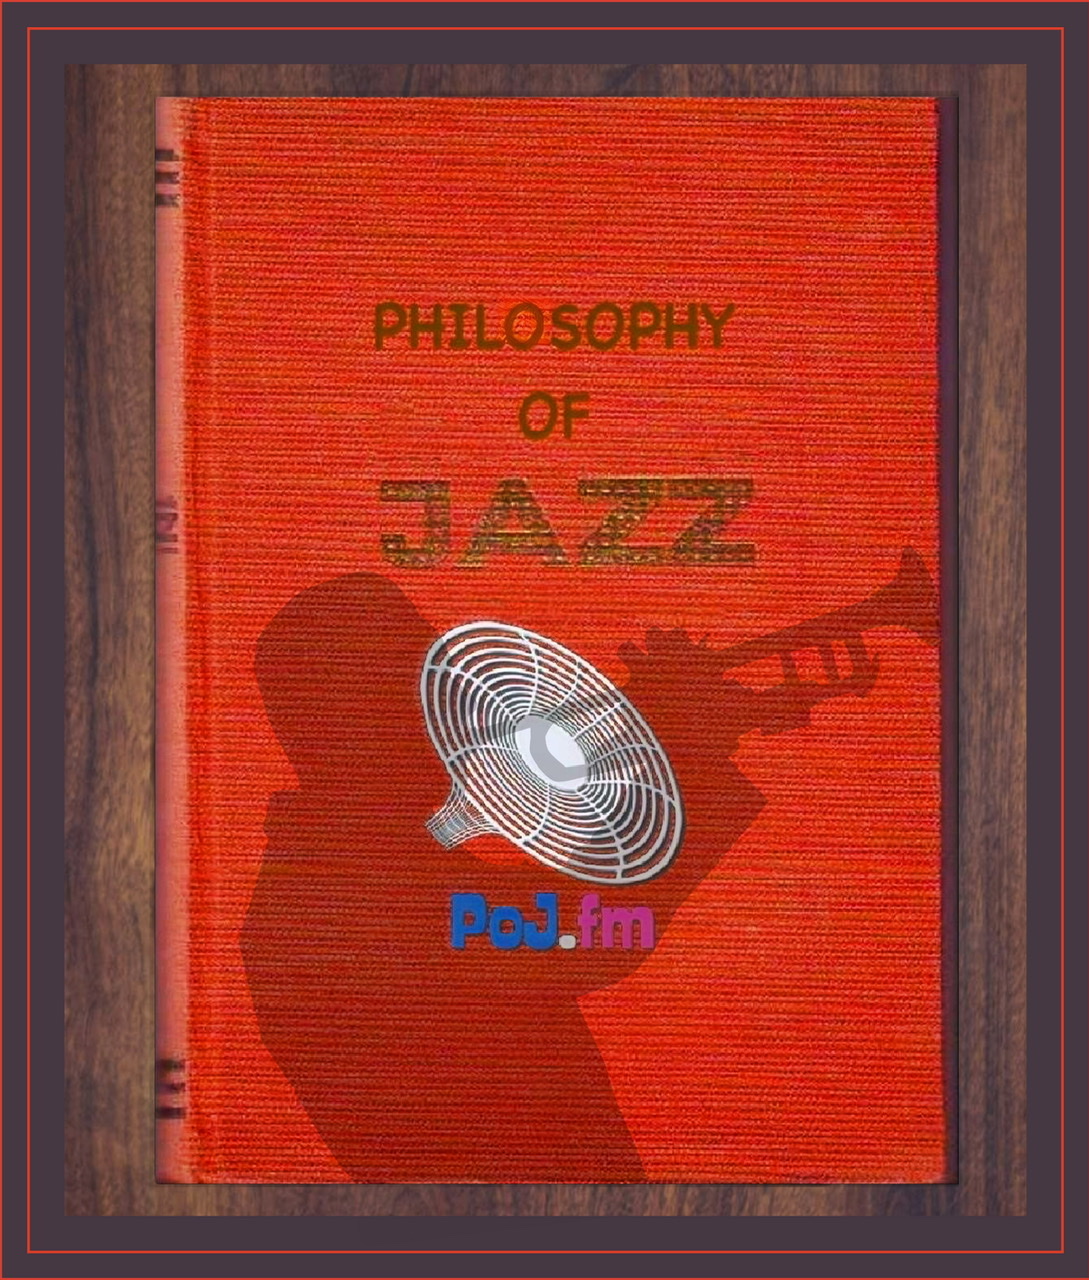 A framed graphic of a single orange textured with thin rough vertical lines with the centered title on book cover of "Philosophy of Jazz" with a single PoJ.fm logo centered underneath title and a shadow silhouette of a male jazz trumpeter in profile facing left with trumpet upraised and being blown.